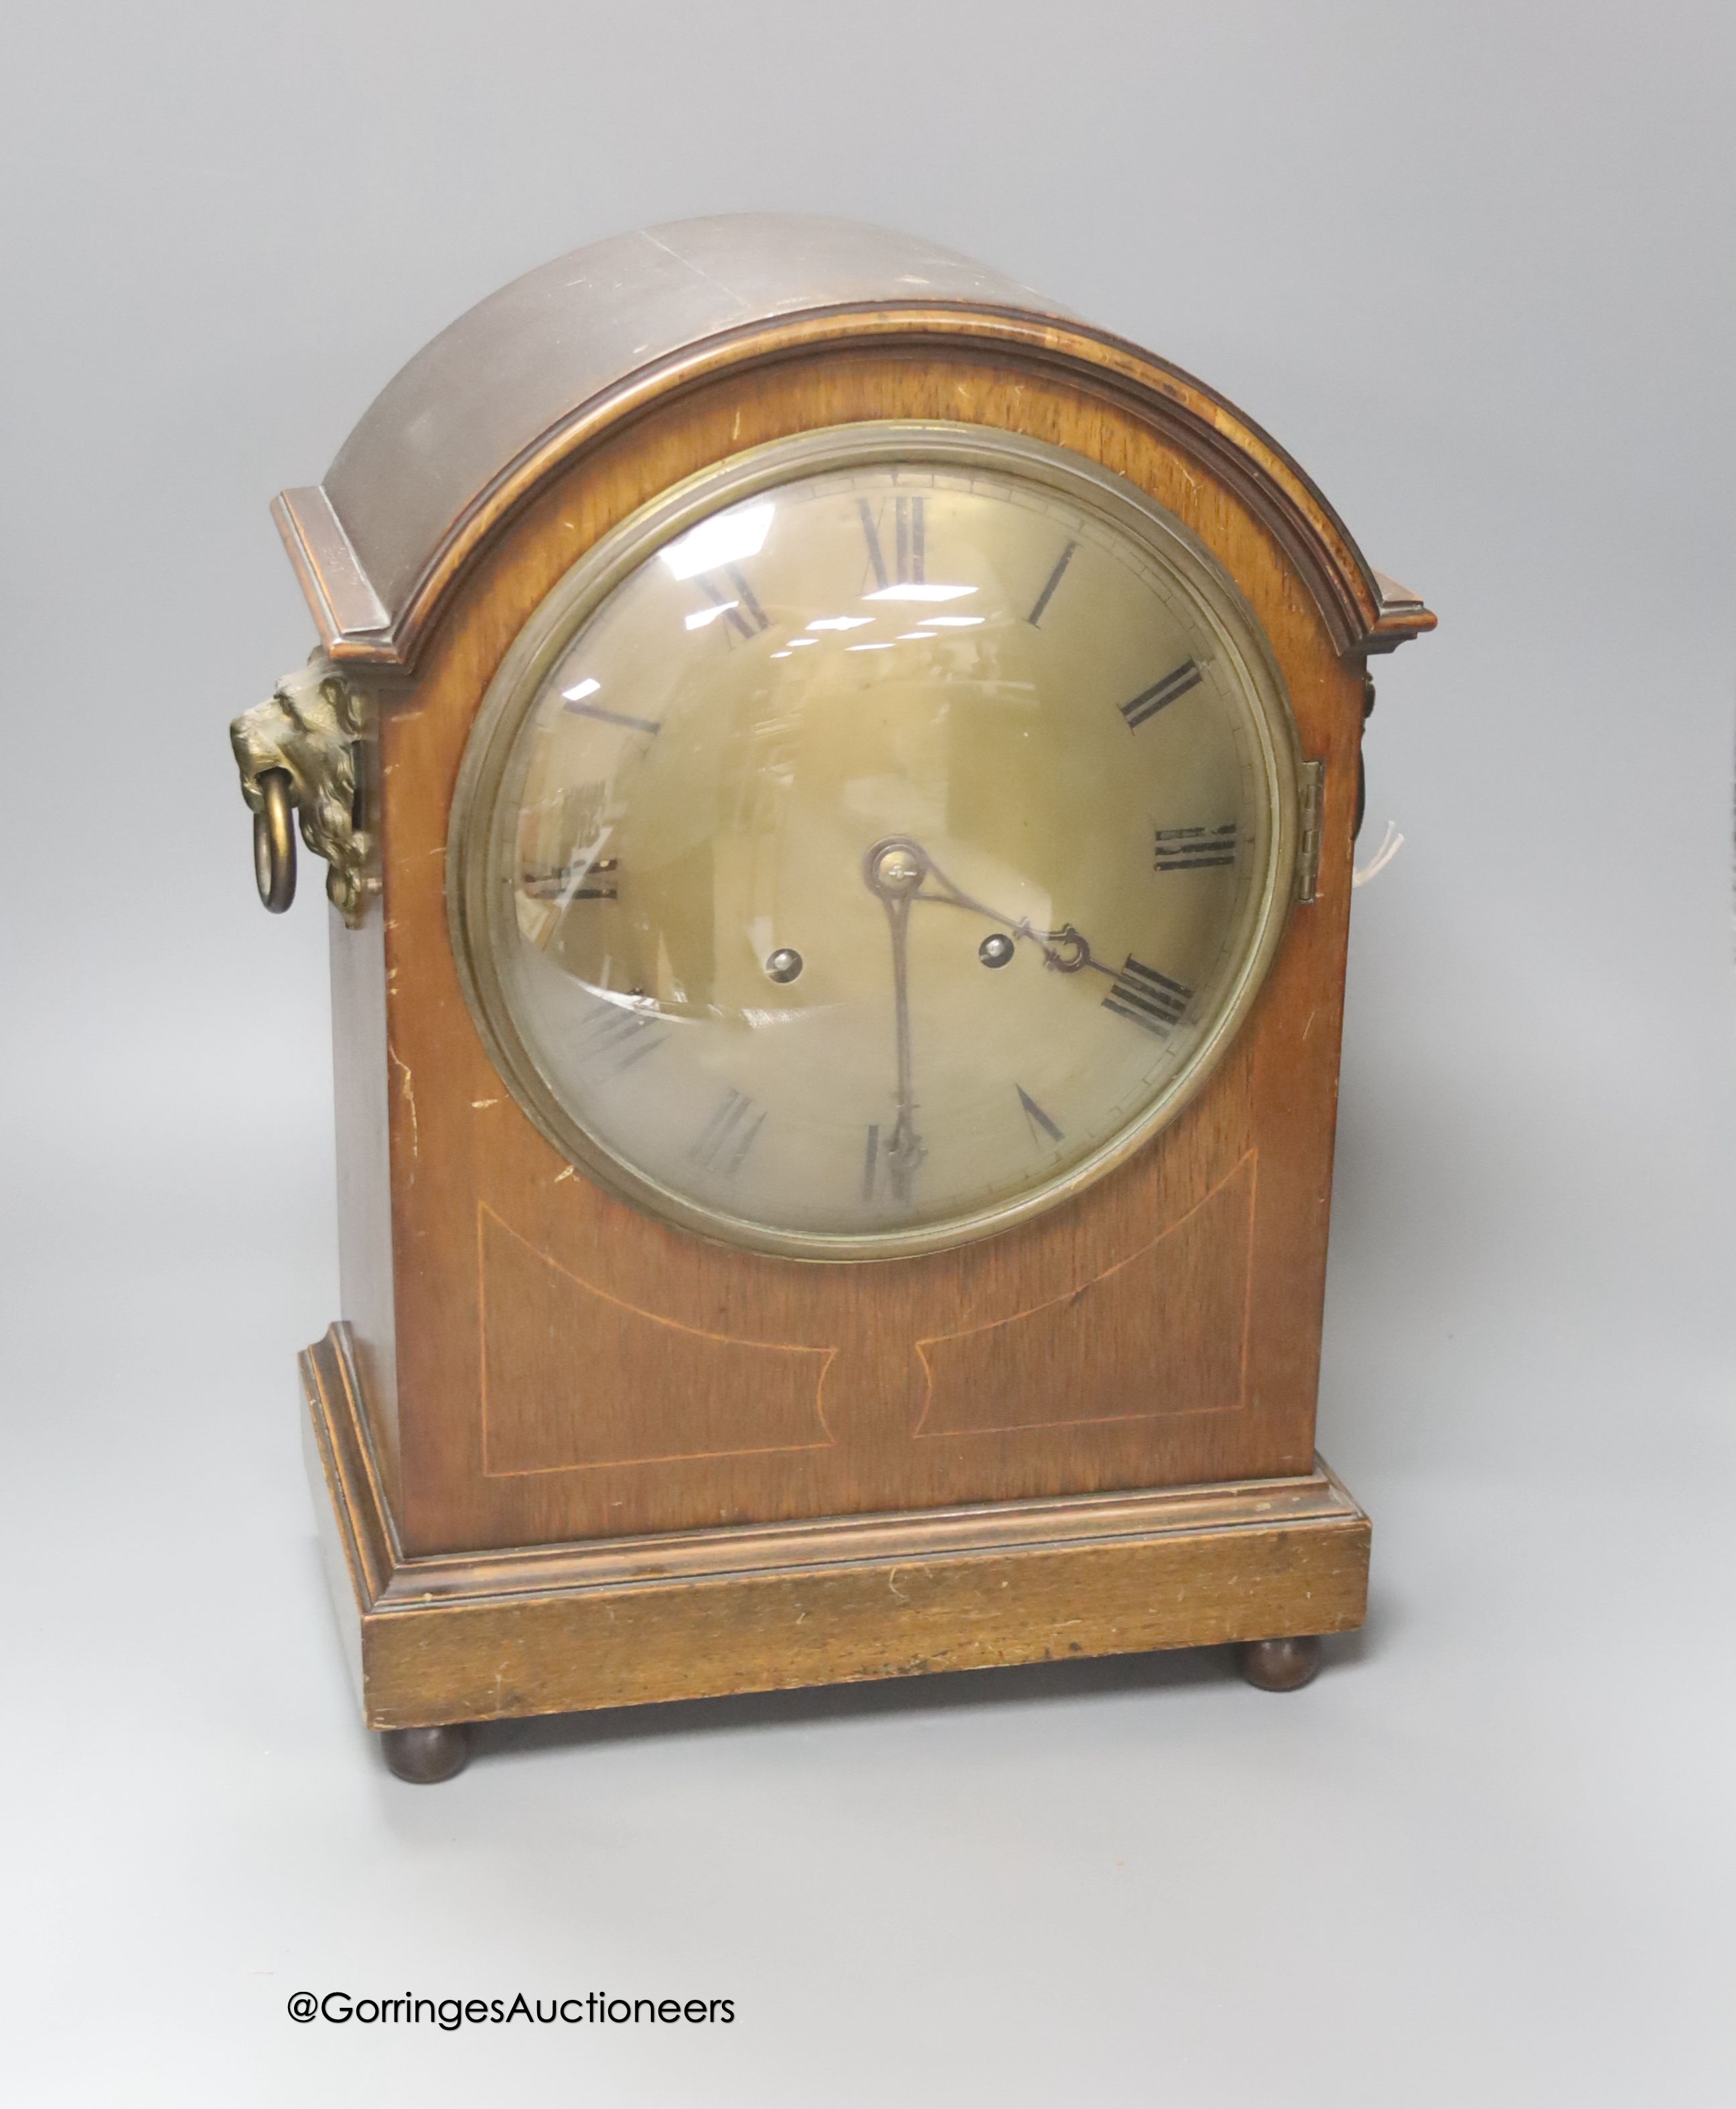 An Edwardian inlaid mahogany mantel clock, with lion mask ring handles, with key and pendulum, height 38cm